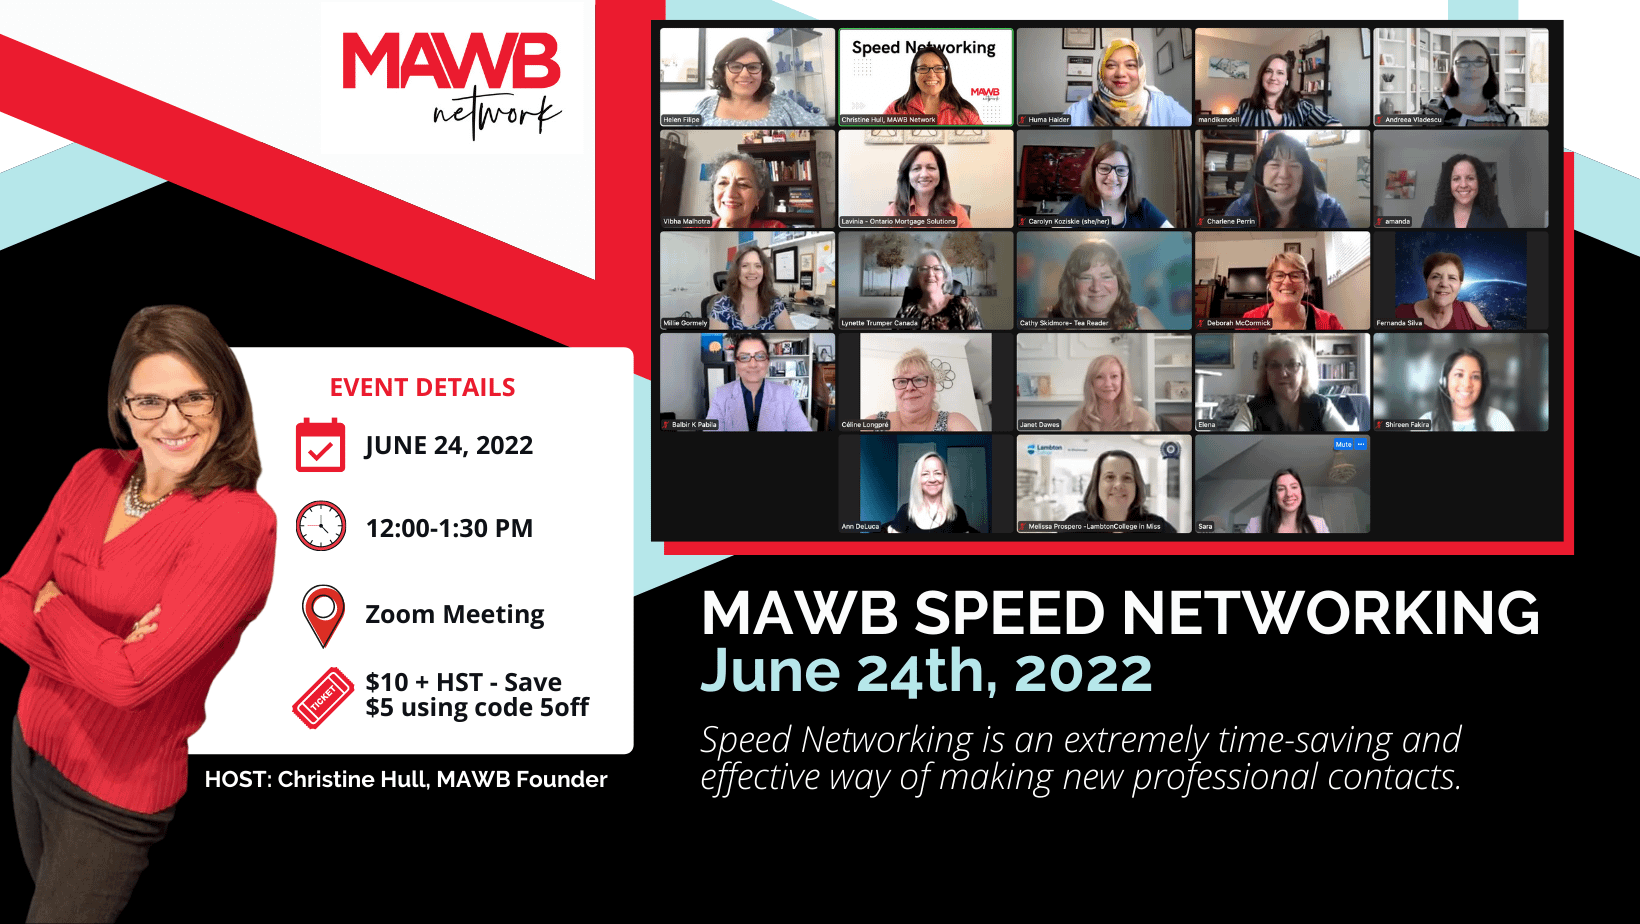 MAWB Speed Networking Event for Business Women- June 24th